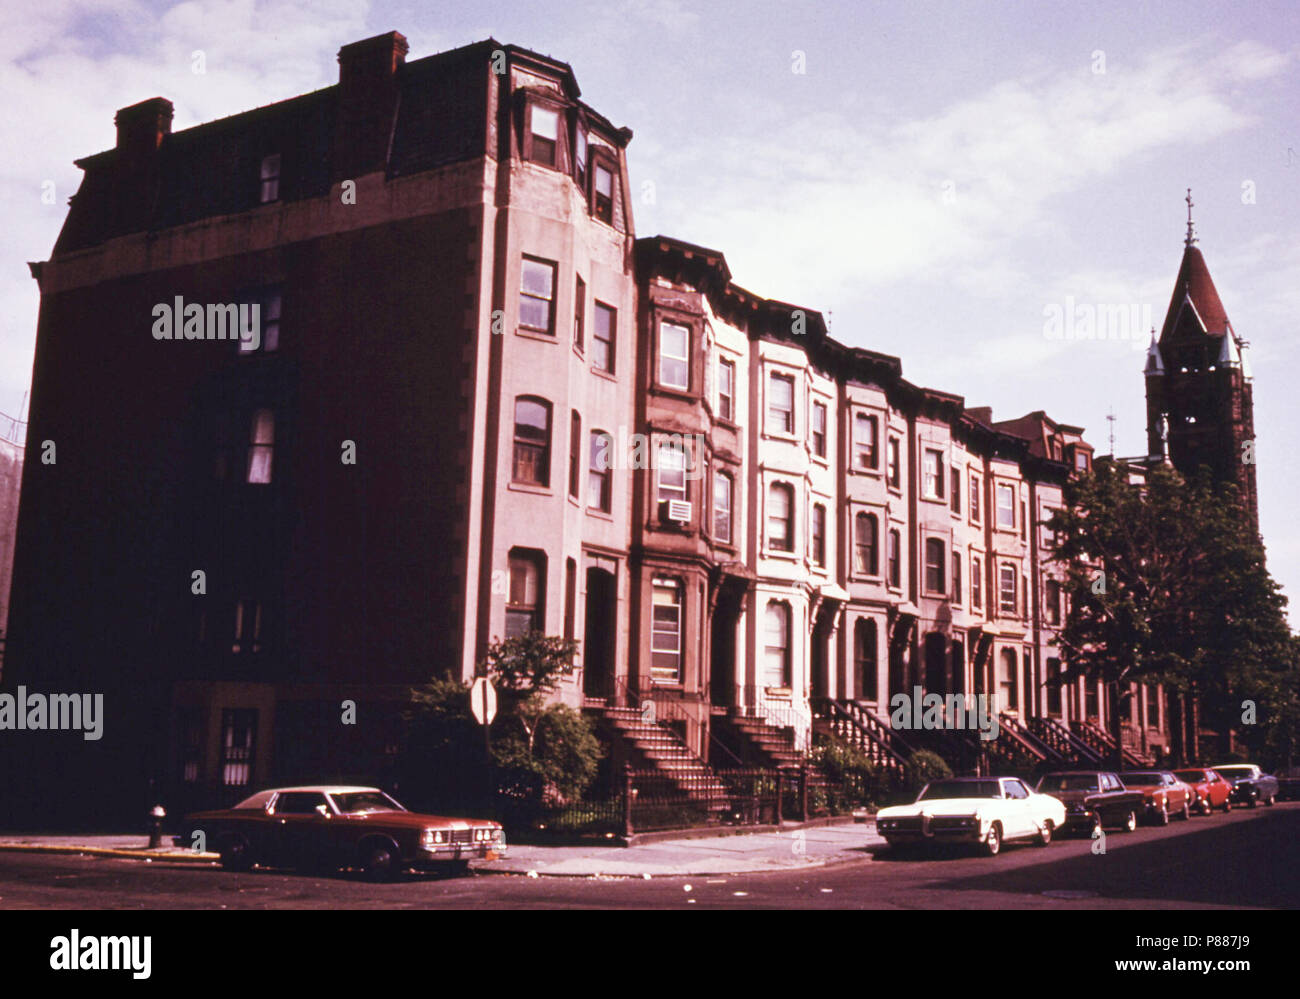 Block of Brownstone Residences in Park Slope of Brooklyn New York City ... 06 1974 Stock Photo